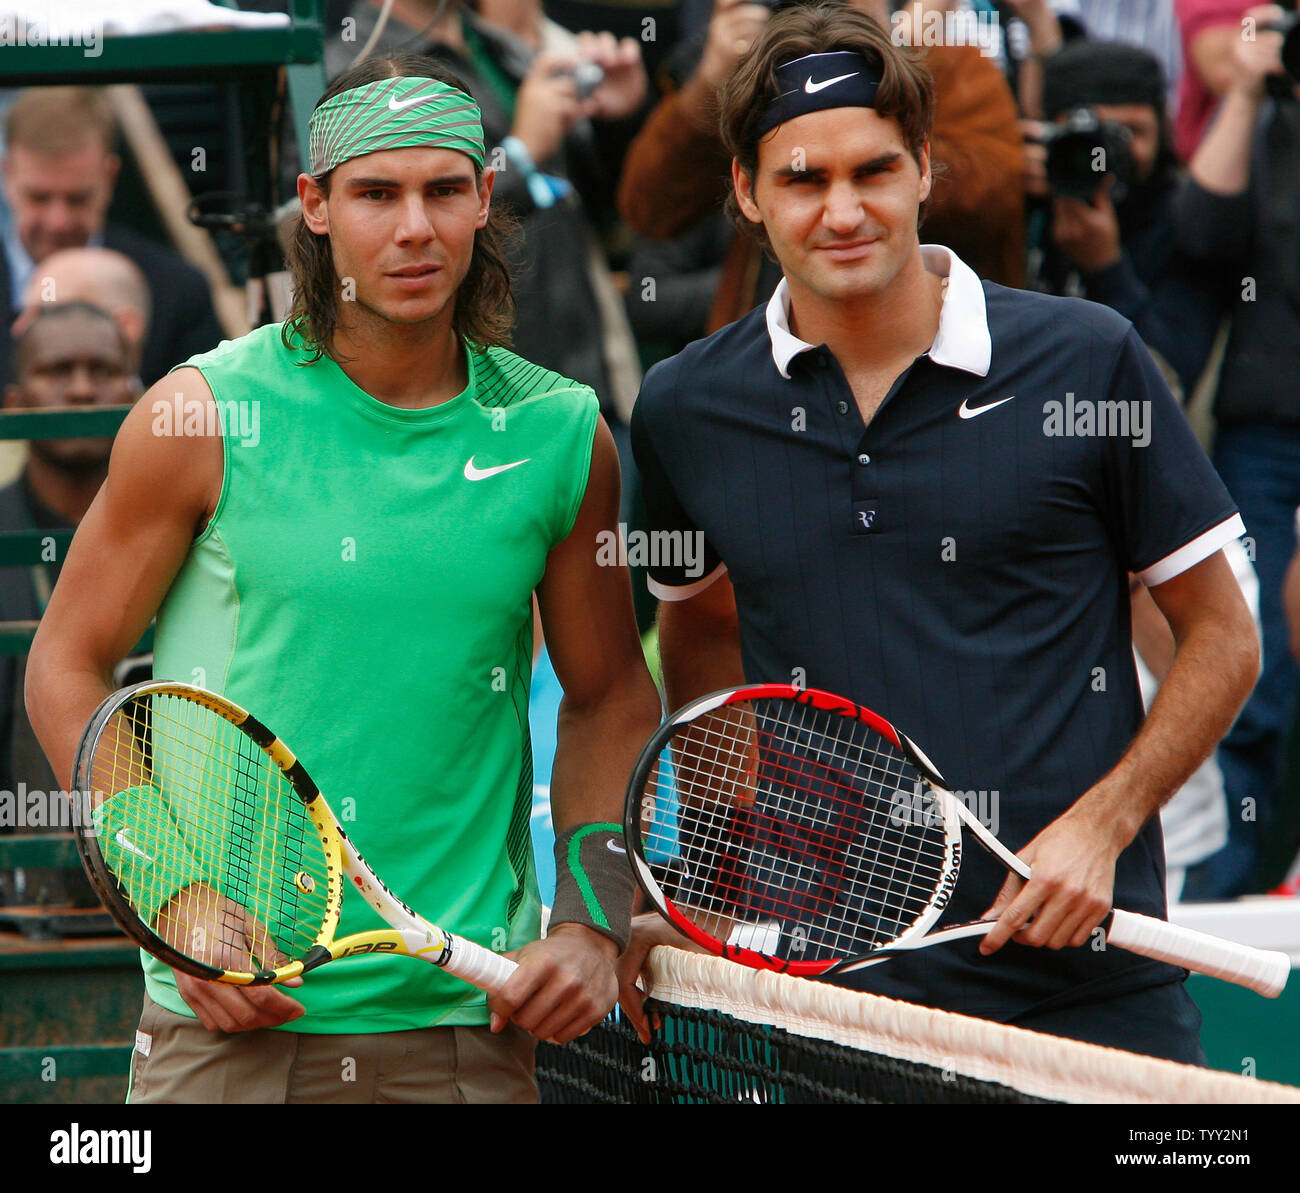 Rafael Nadal (L) of Spain and Roger Federer of Switzerland prepare to play  their finals match at the French Tennis Open in Paris on June 8, 2008. The  second-seeded Nadal defeated the